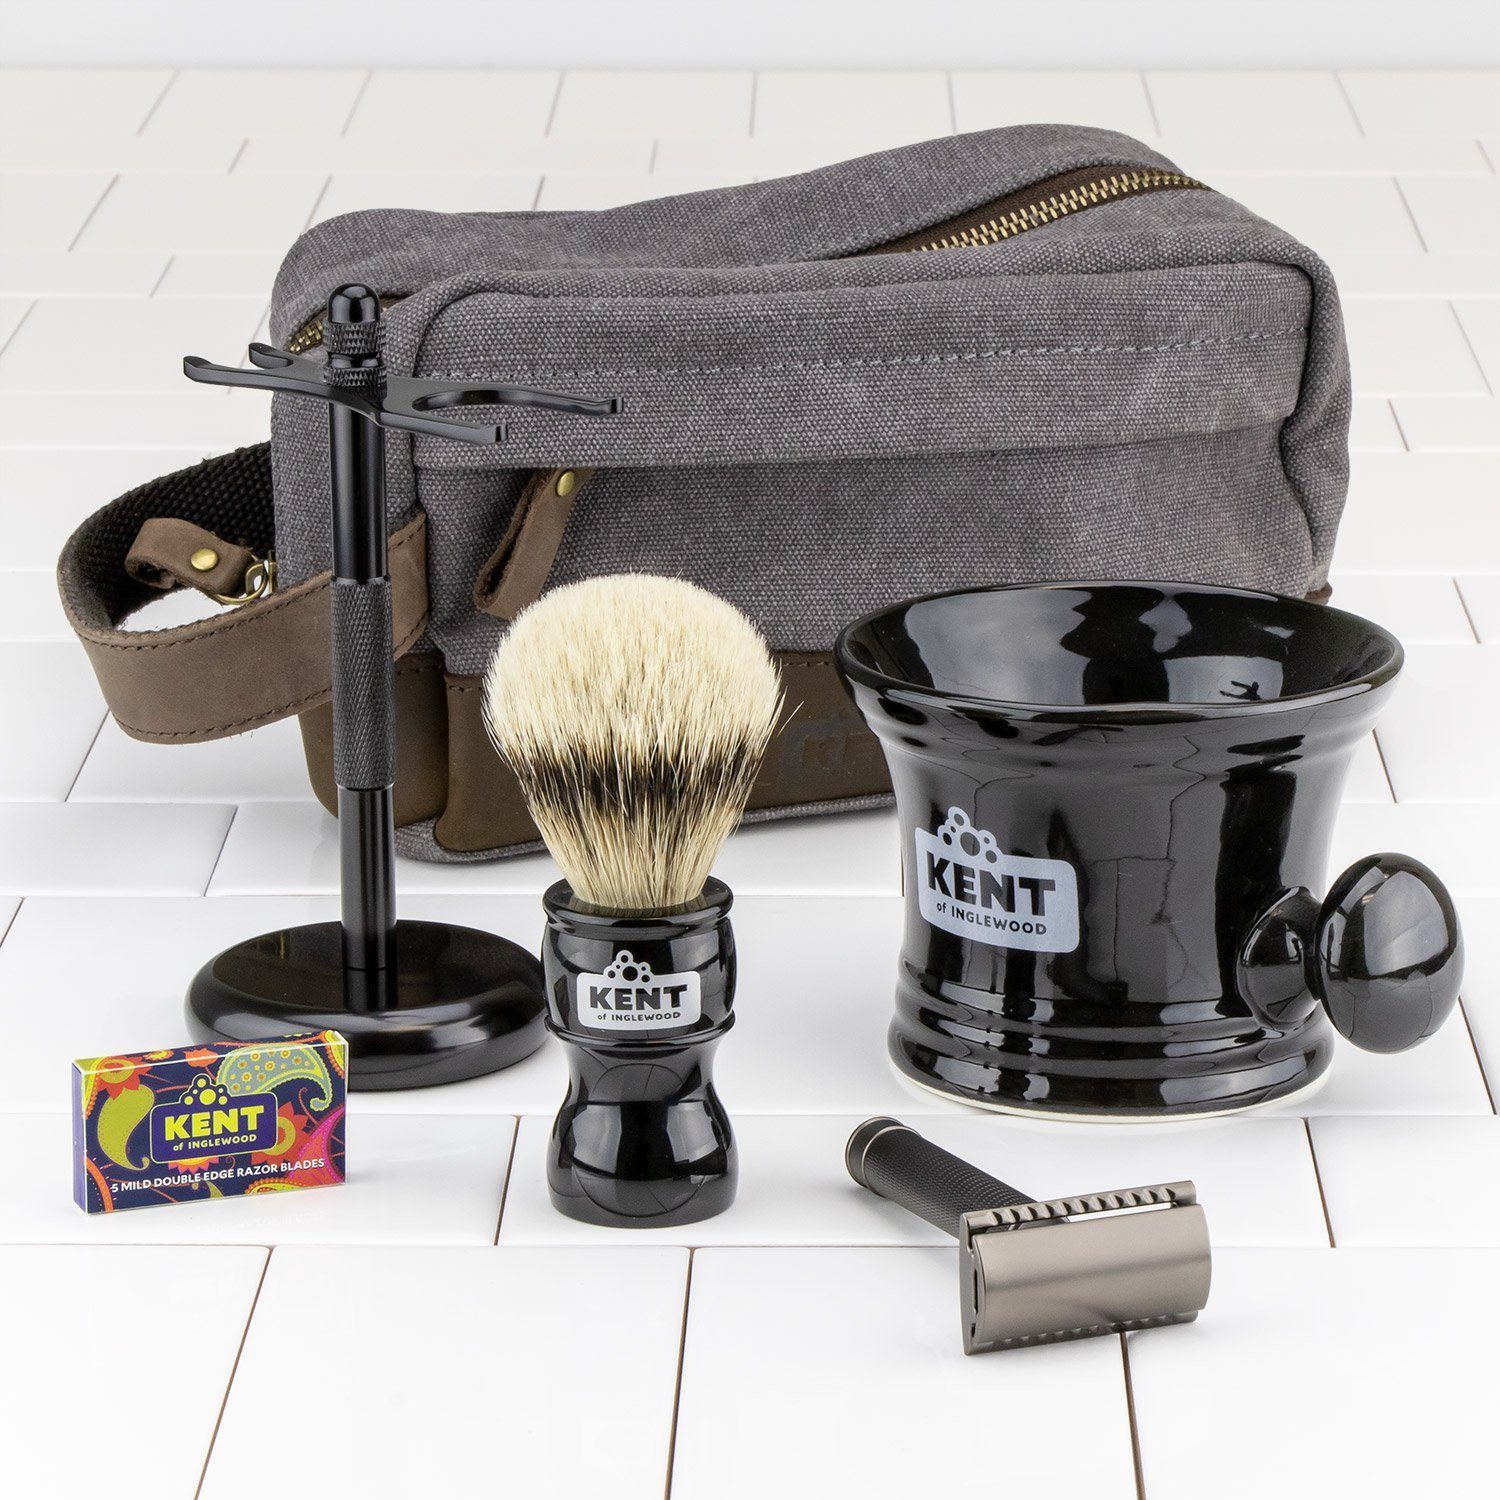 Kent of Inglewood Deluxe Shave Kit from Kent of Inglewood